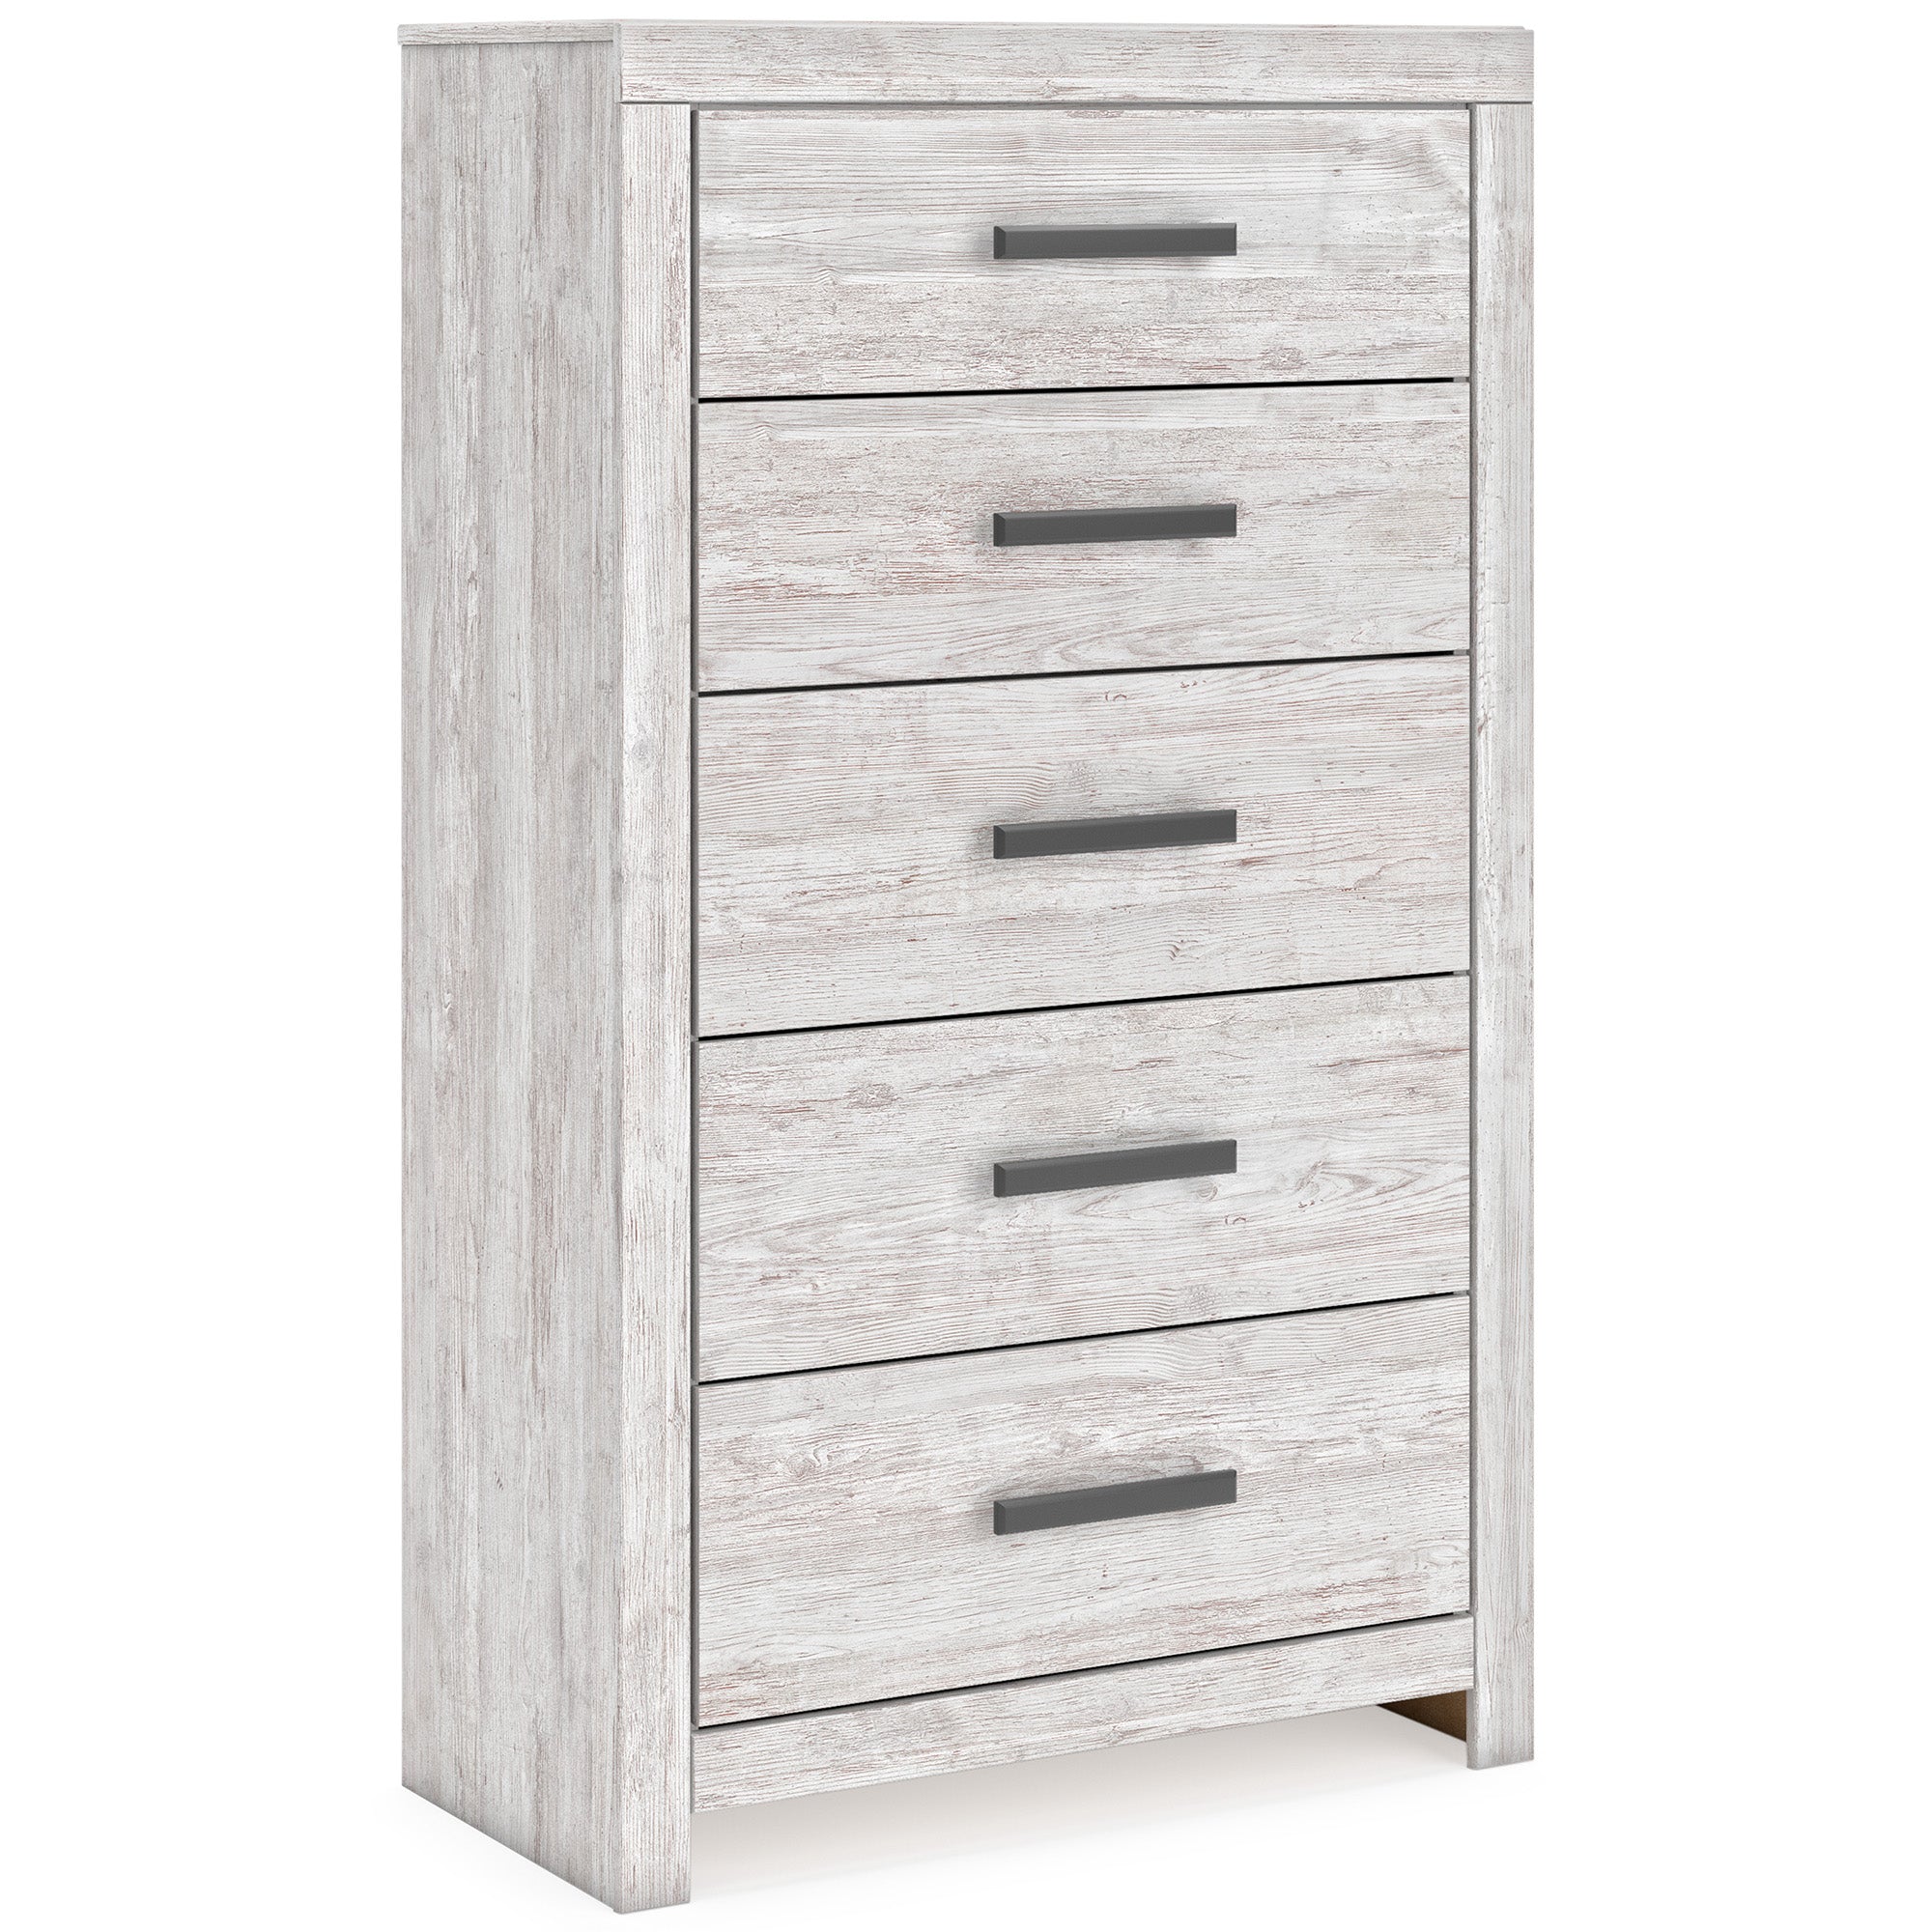 Robbinsdale Five Drawer Chest Available Online & In Store at Bridgeport,  Ohio.